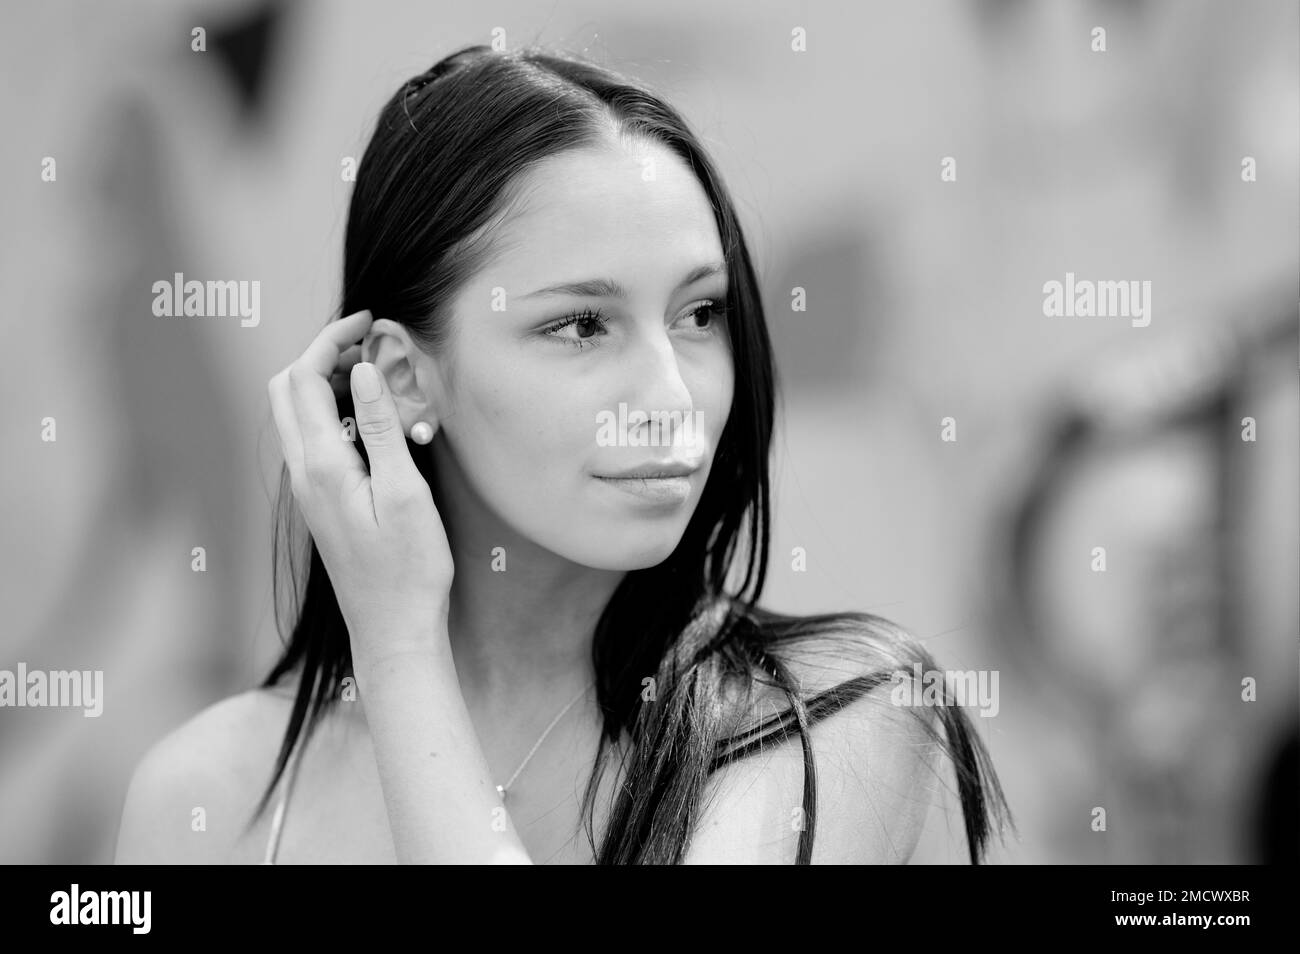 Black and white portrait of a very young pretty woman with a blurred background. With her right hand she guides her long hair behind her ear Stock Photo